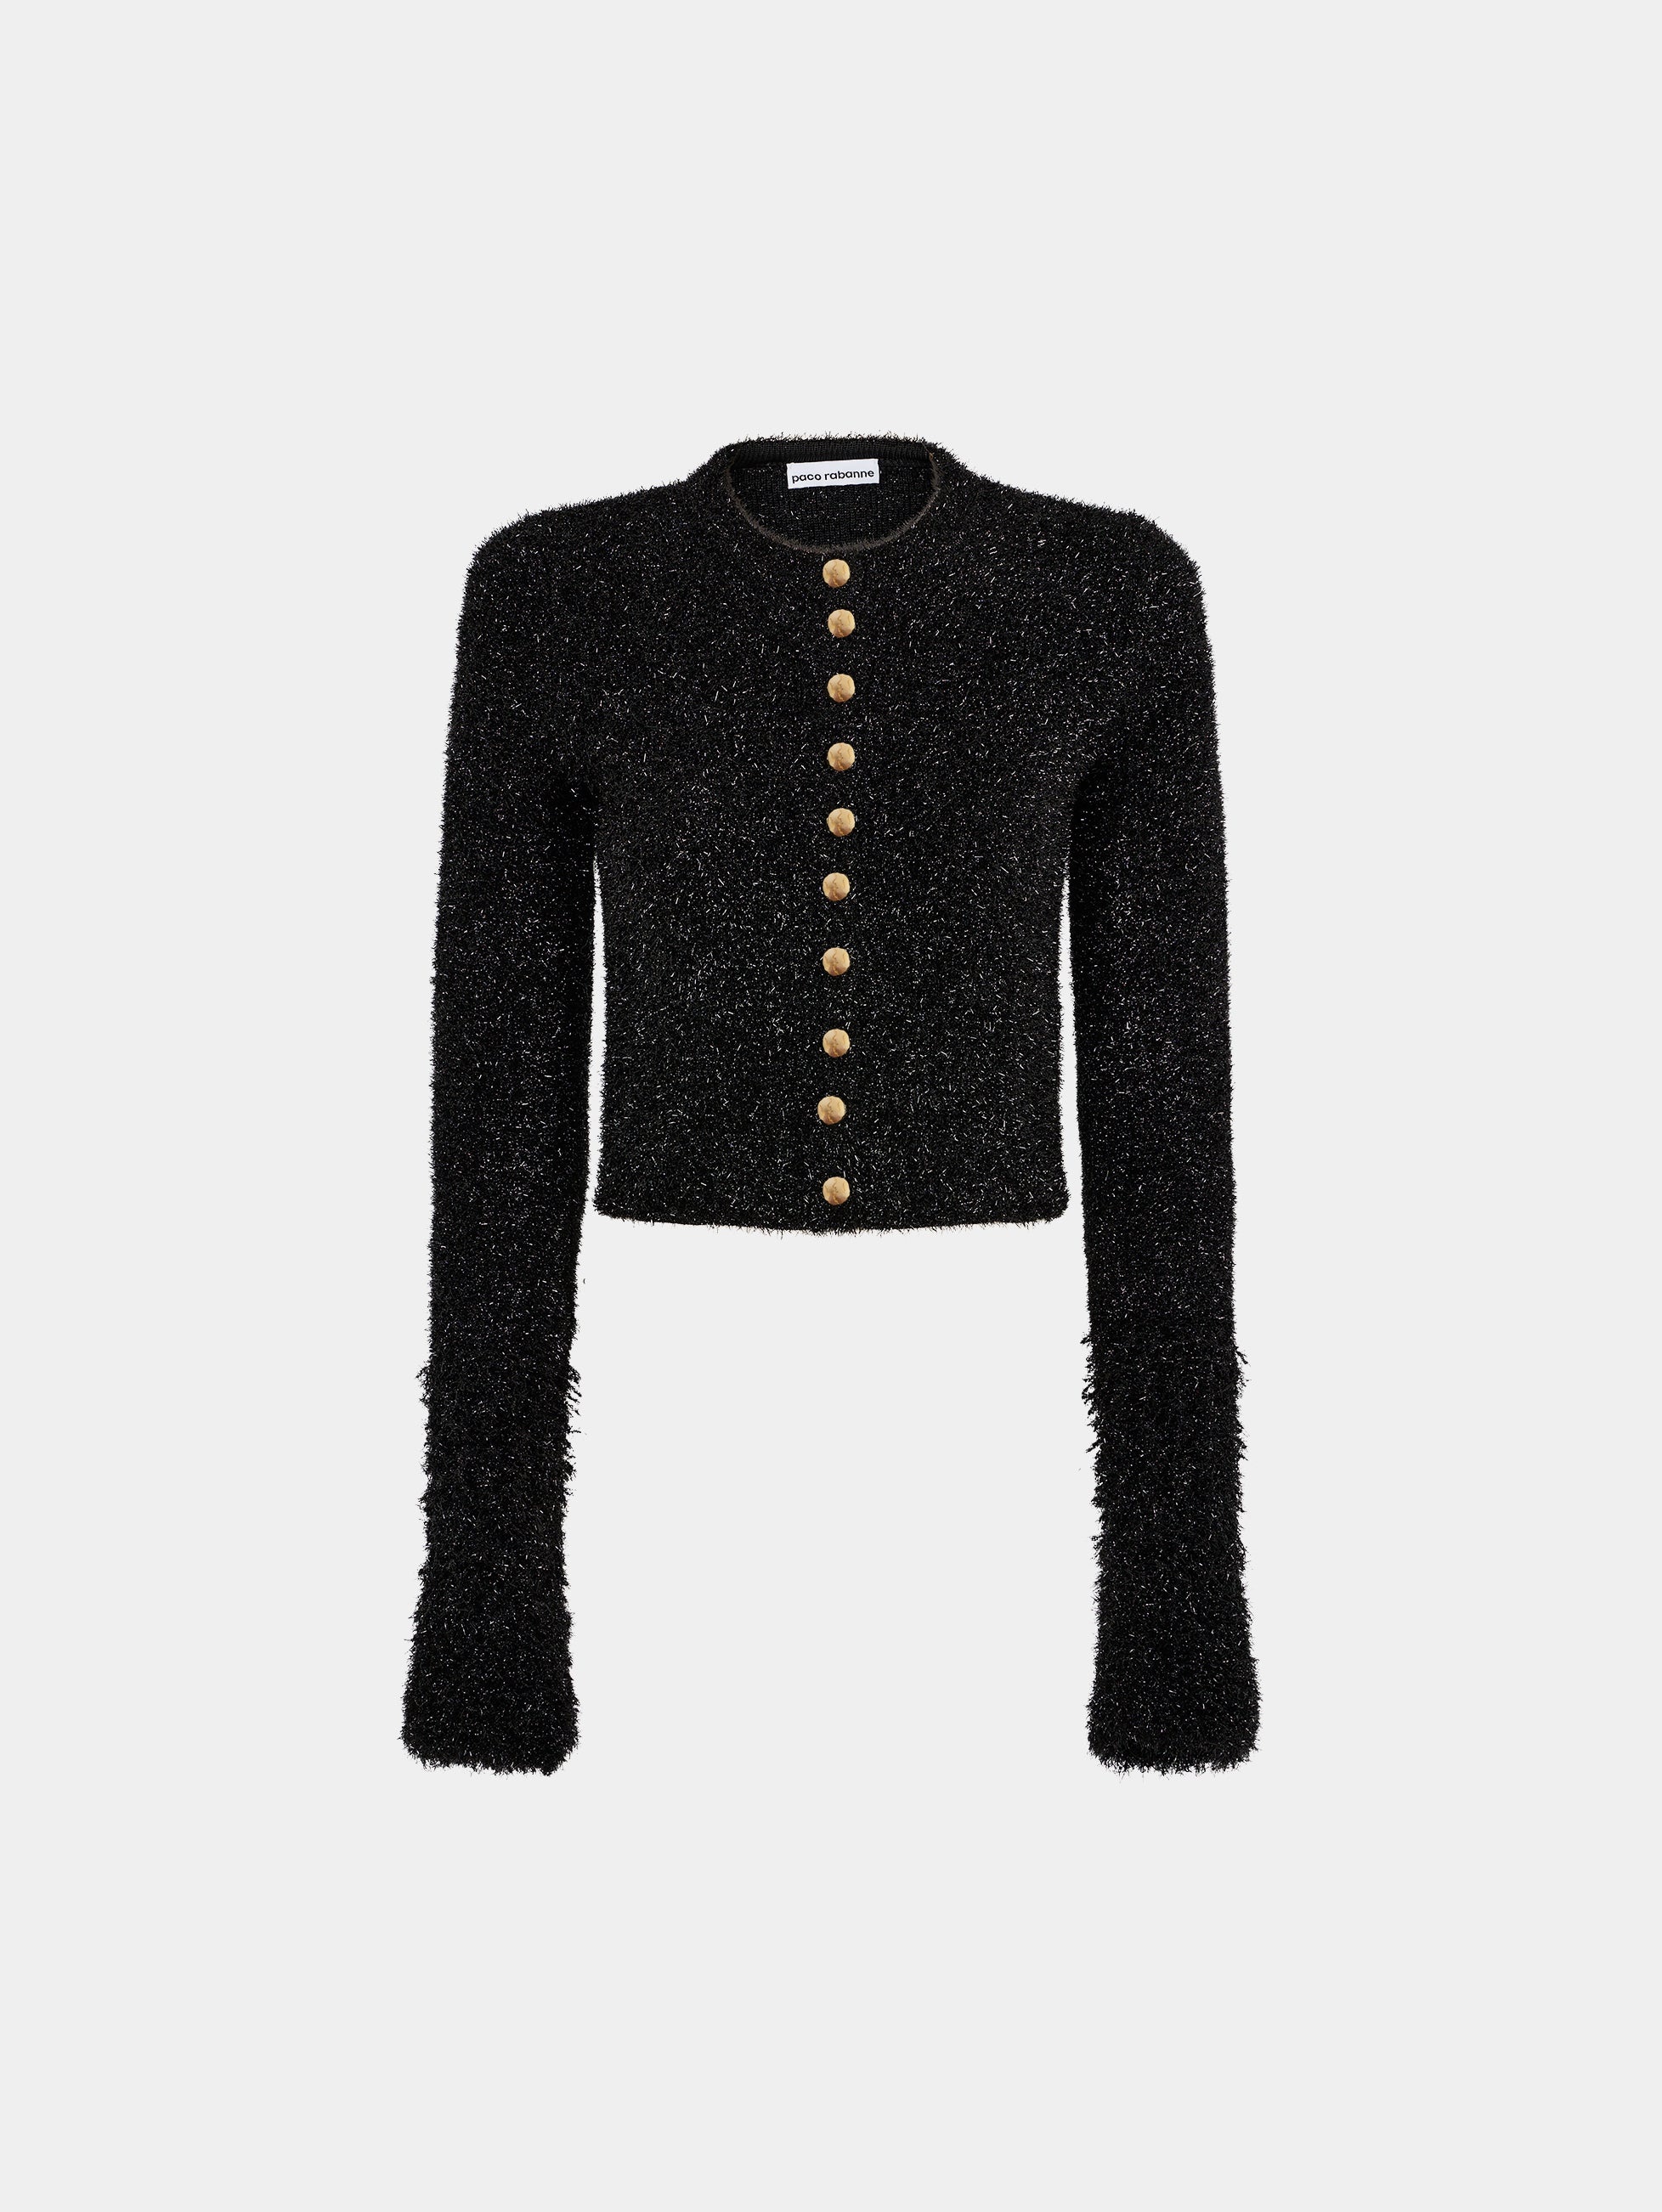 CROPPED BLACK CARDIGAN WITH GOLD BUTTONS - 1